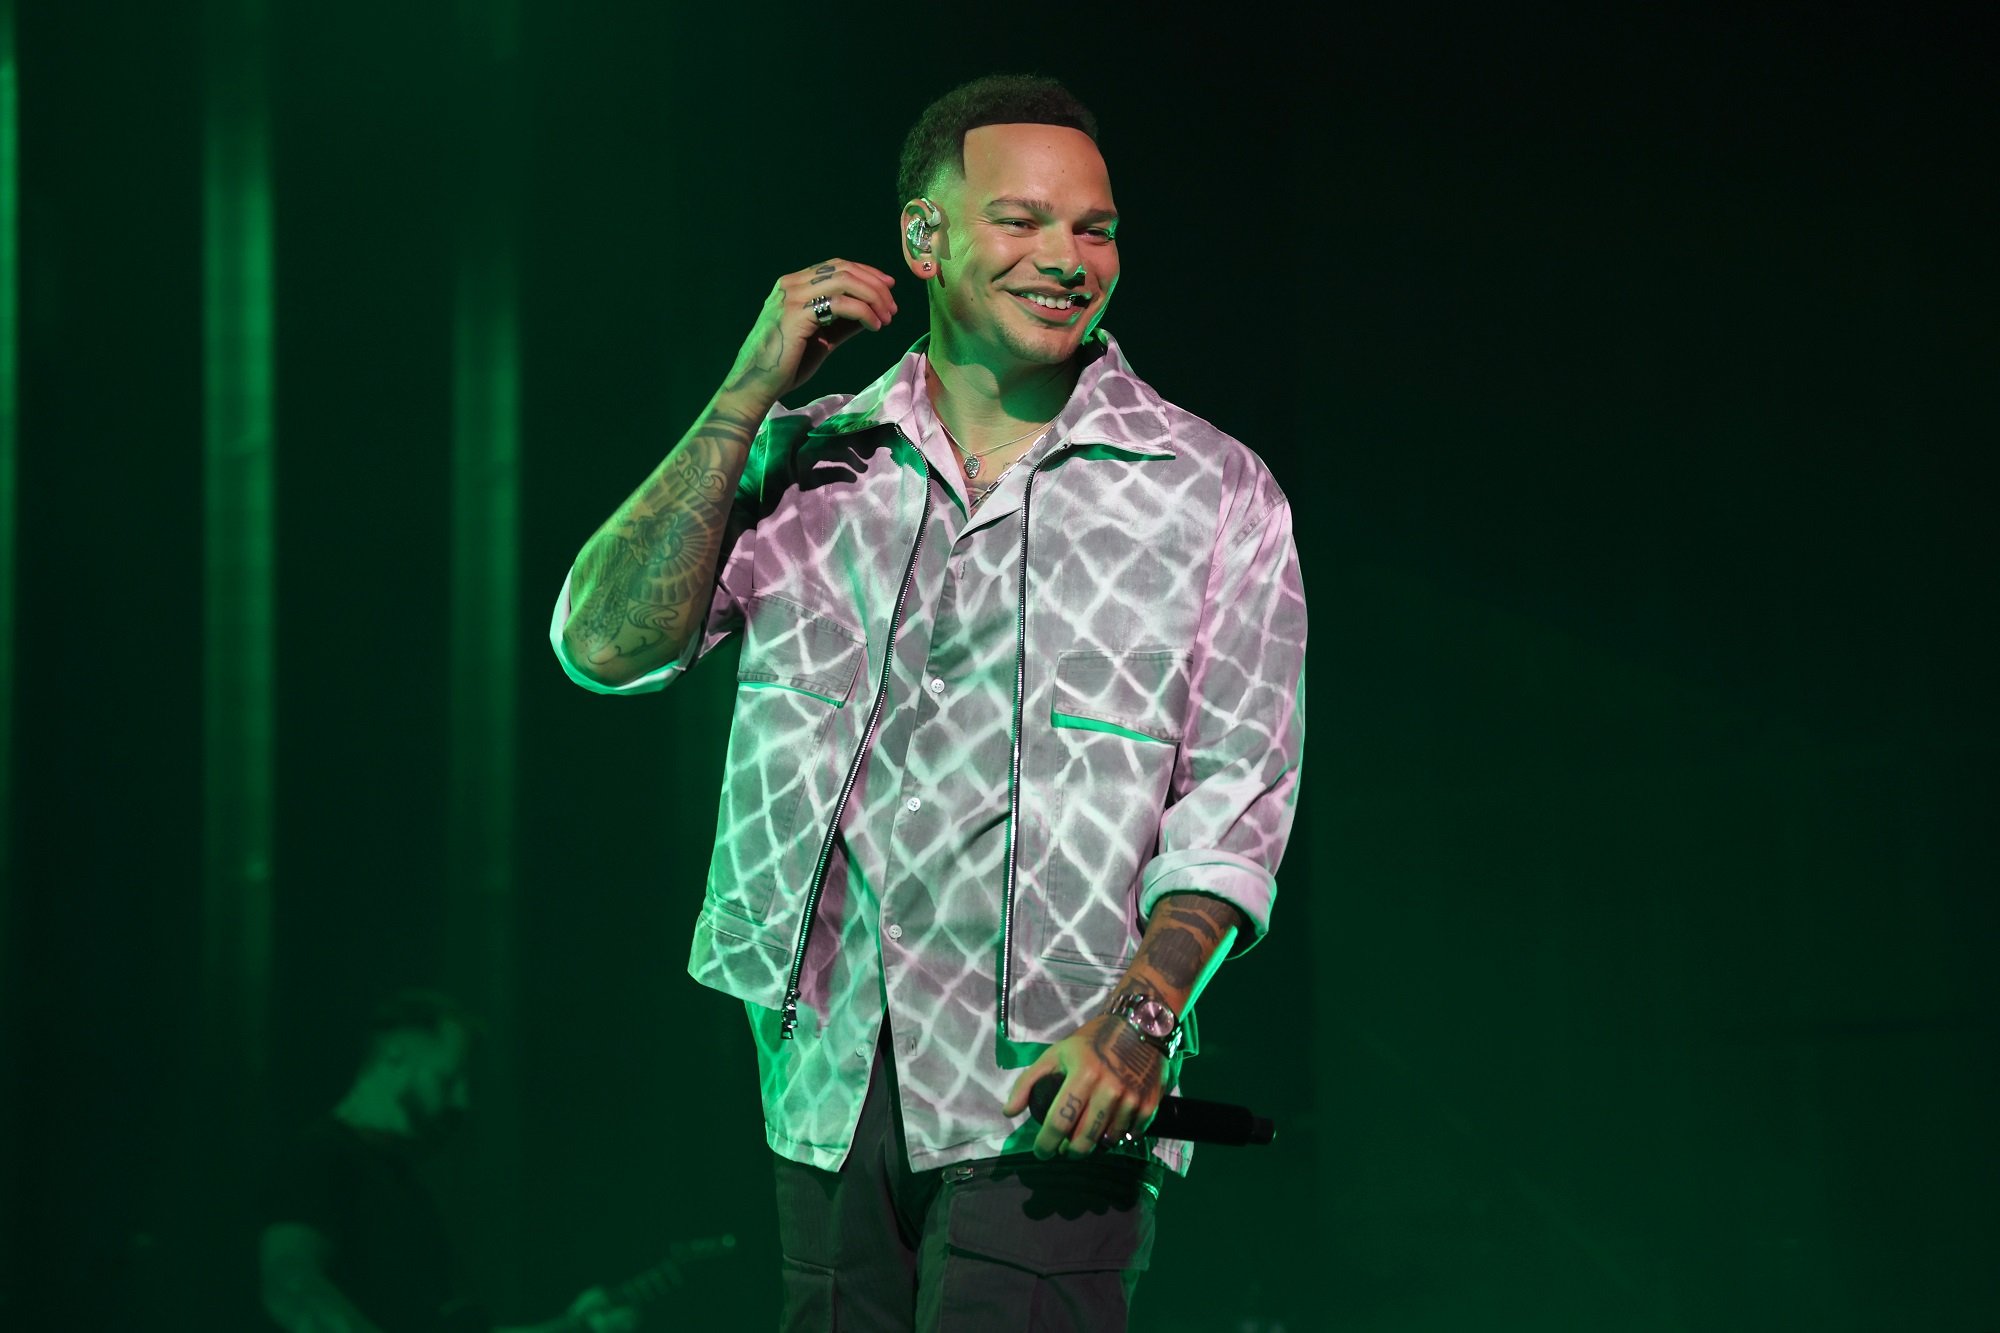 Kane Brown stands on stage with green lighting around him